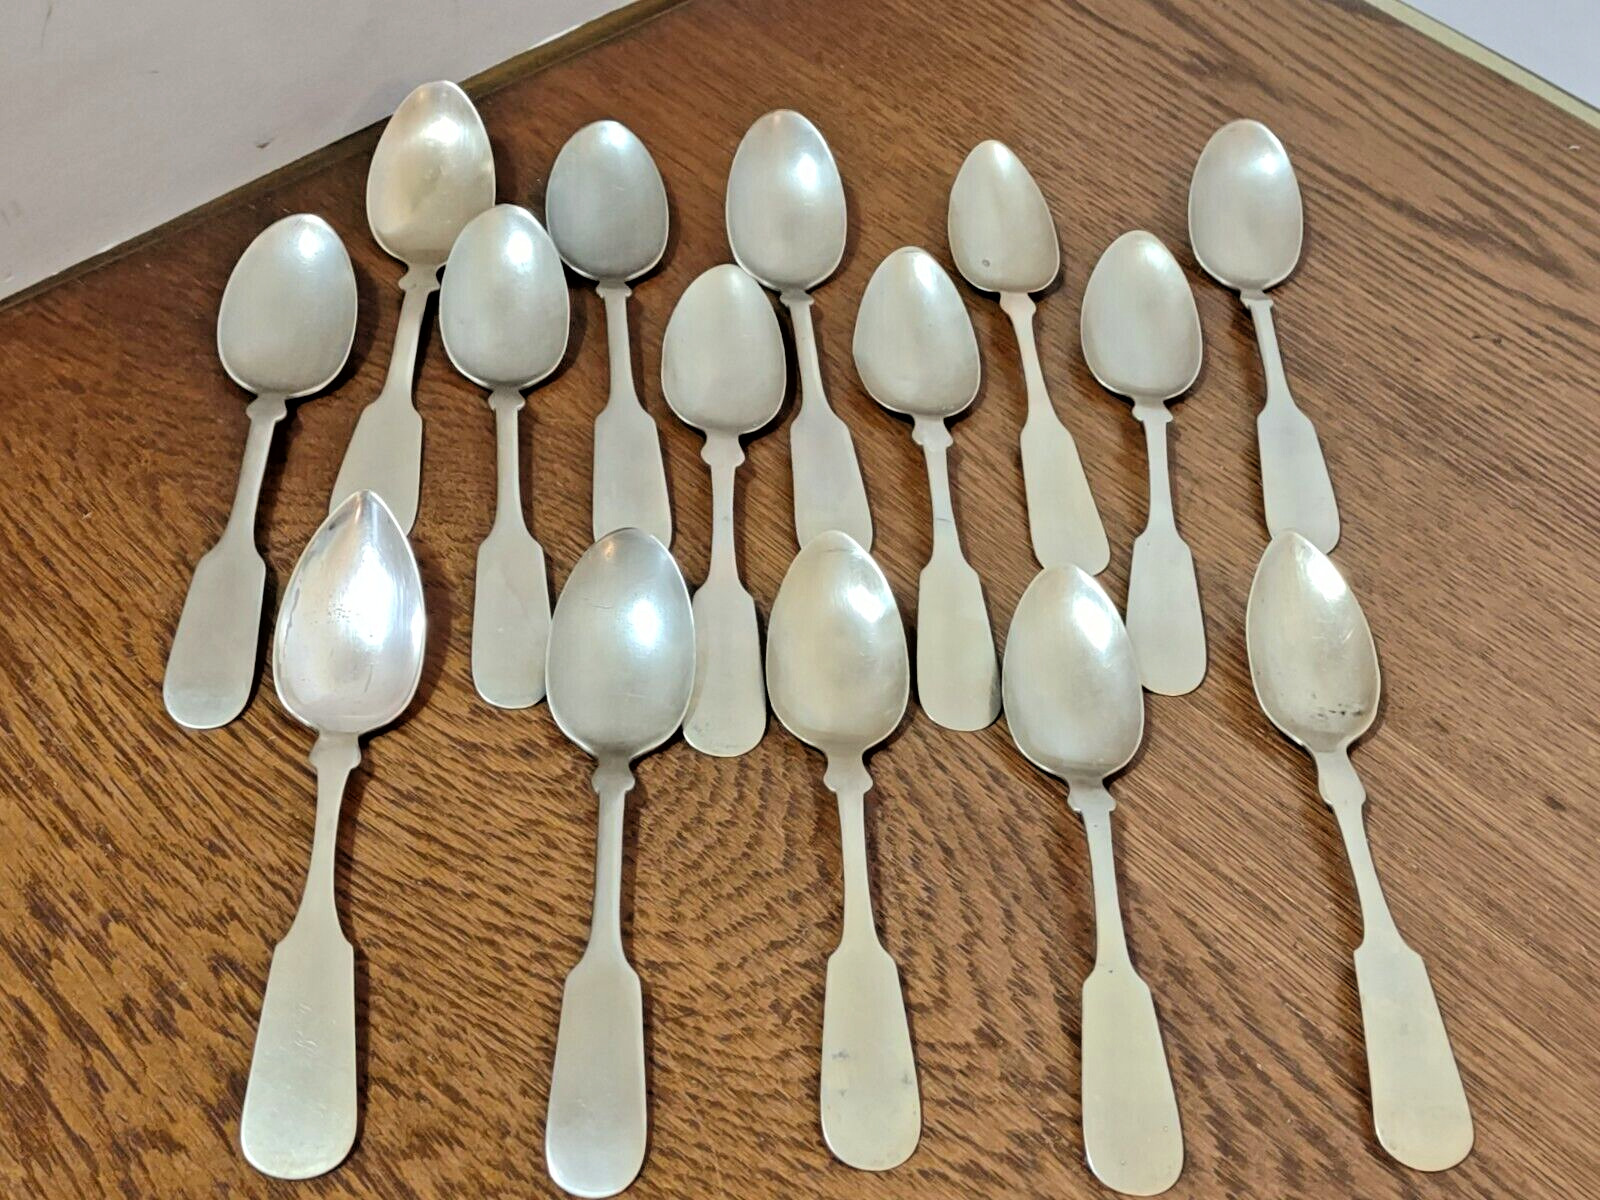 Hall & Elton 15 pc  Antique 238g late 1800s to early 1900s German Silver Spoons